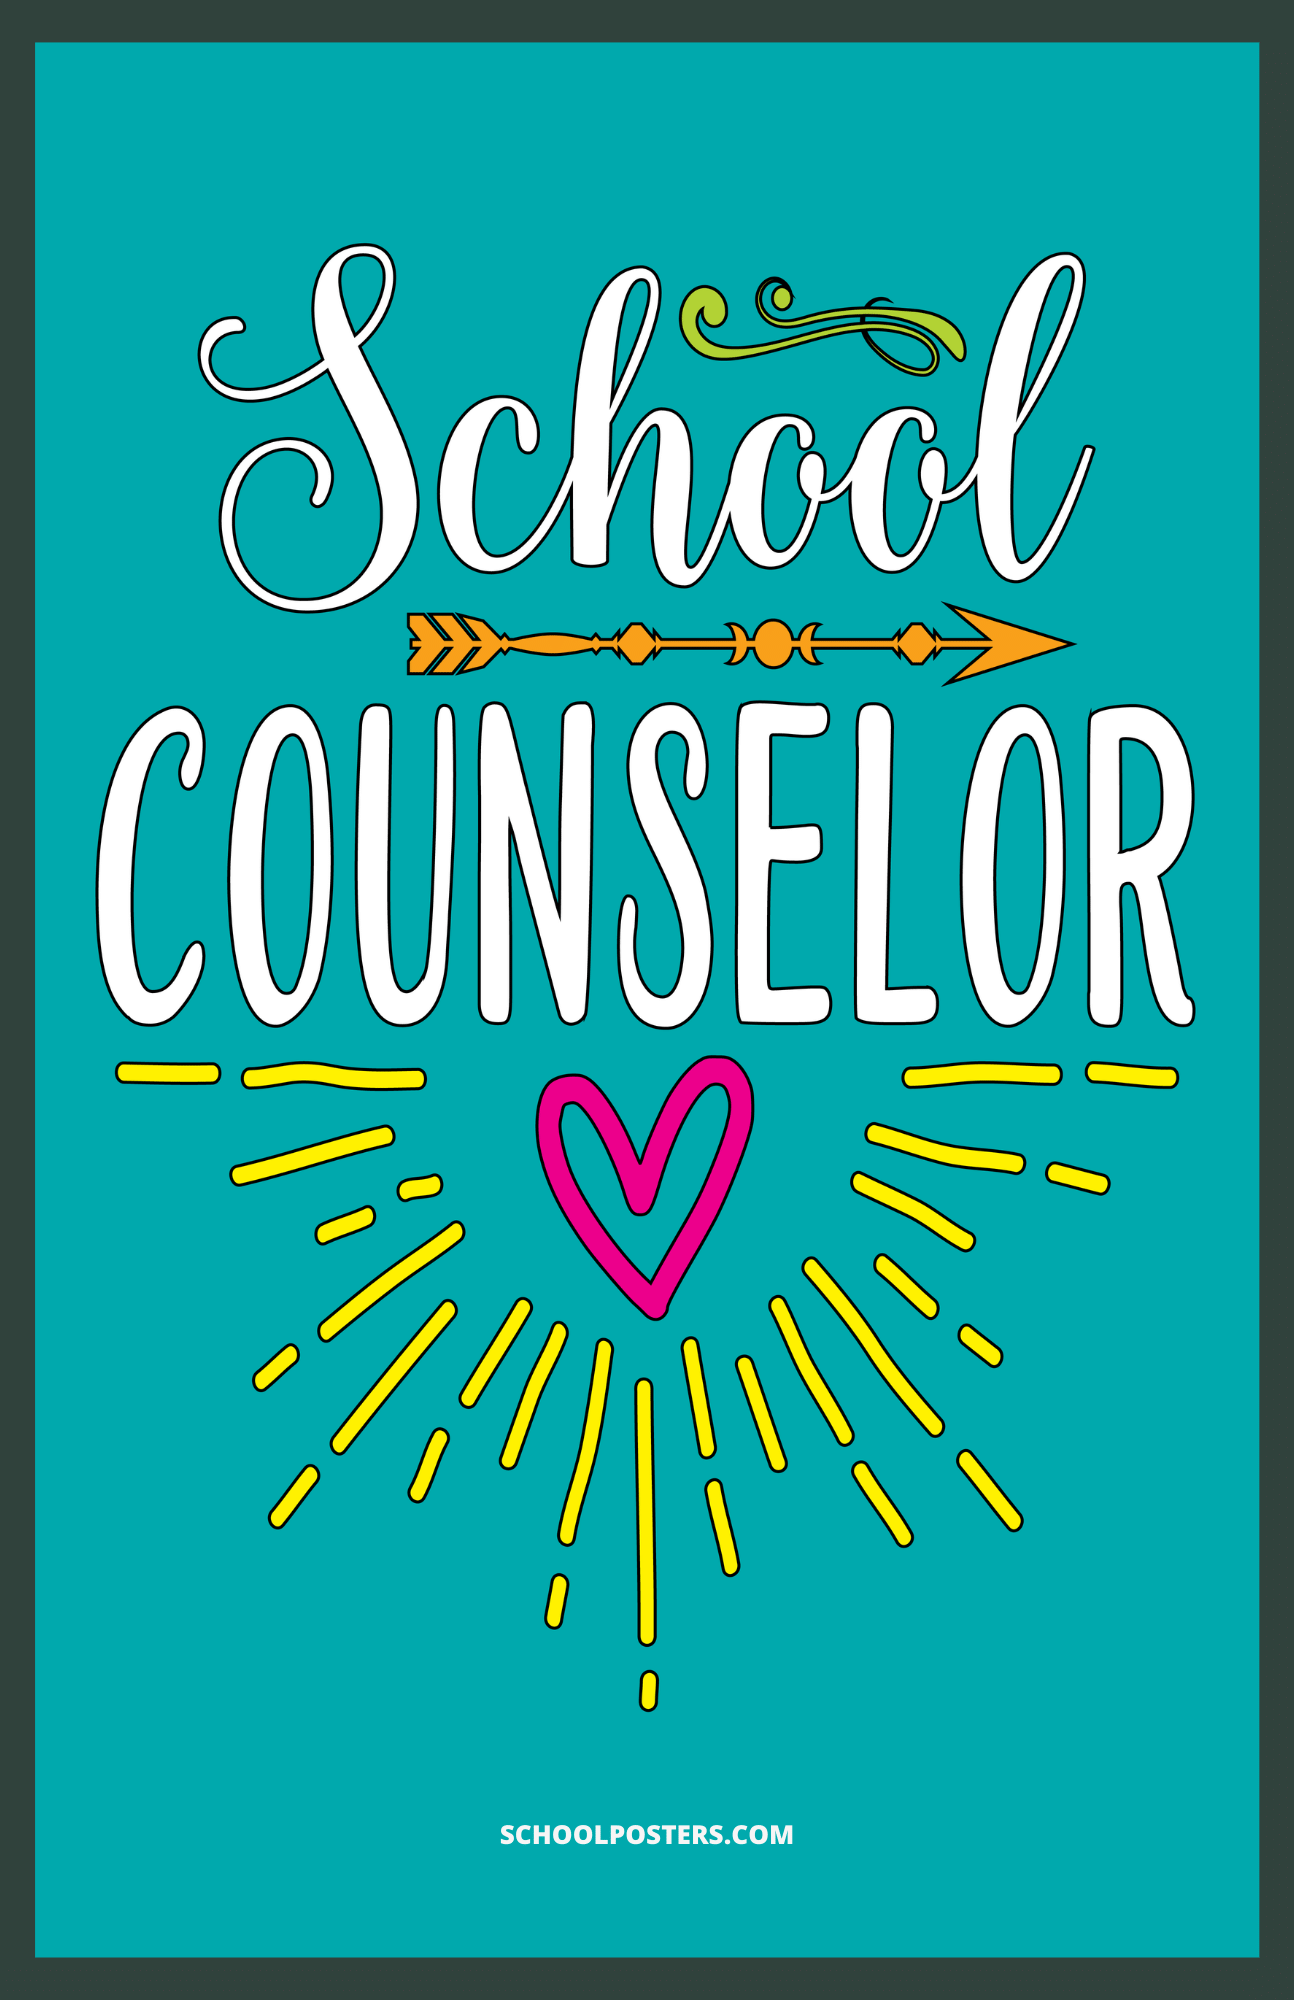 School Counselor Poster